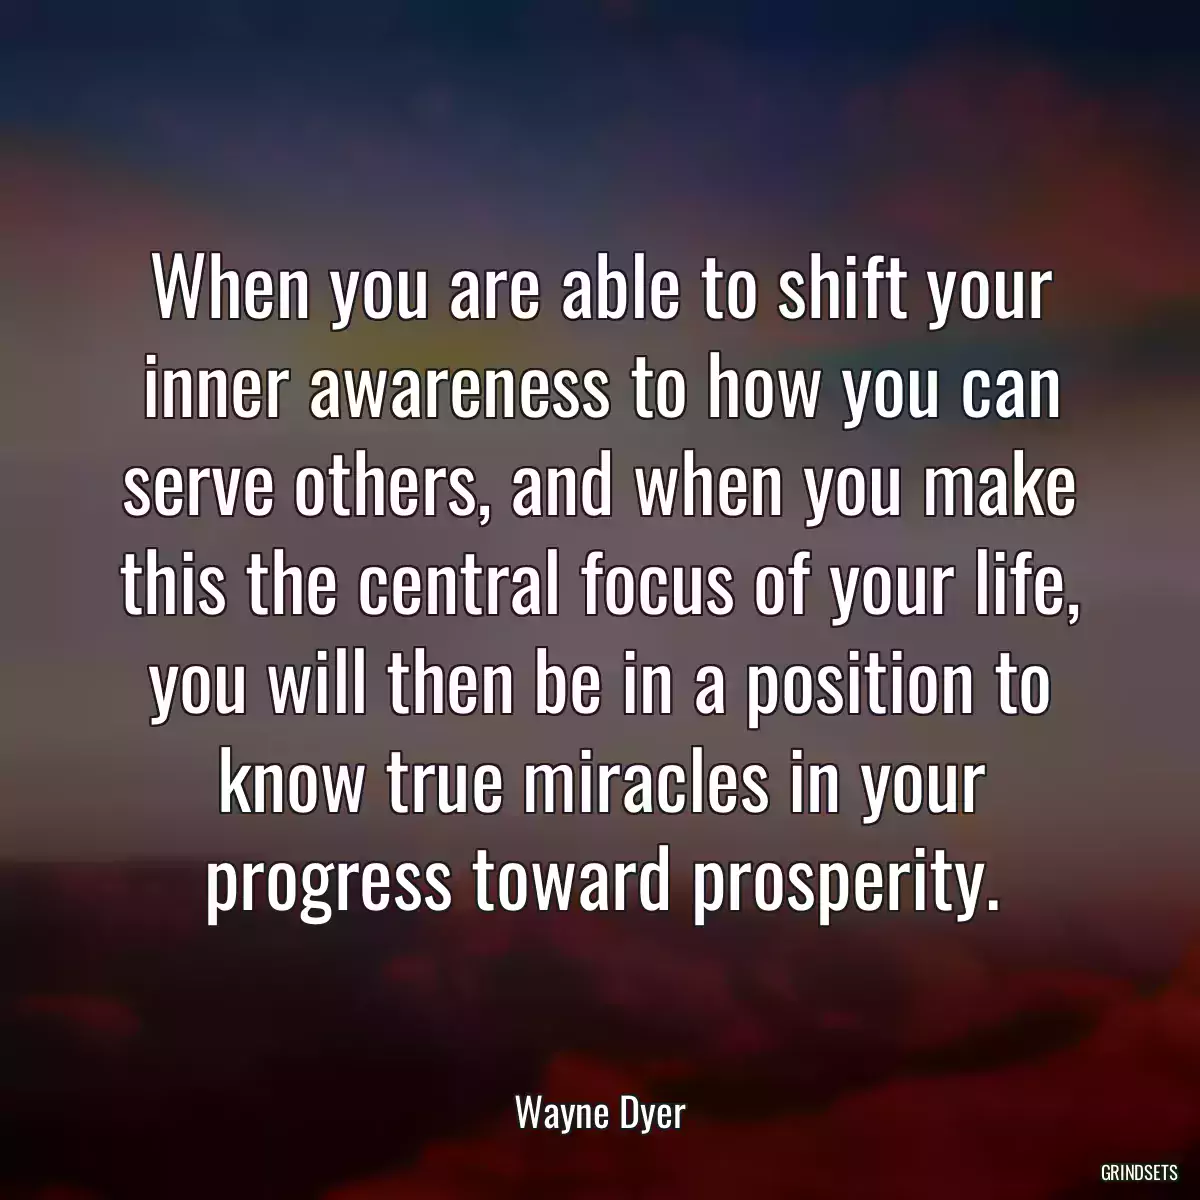 When you are able to shift your inner awareness to how you can serve others, and when you make this the central focus of your life, you will then be in a position to know true miracles in your progress toward prosperity.